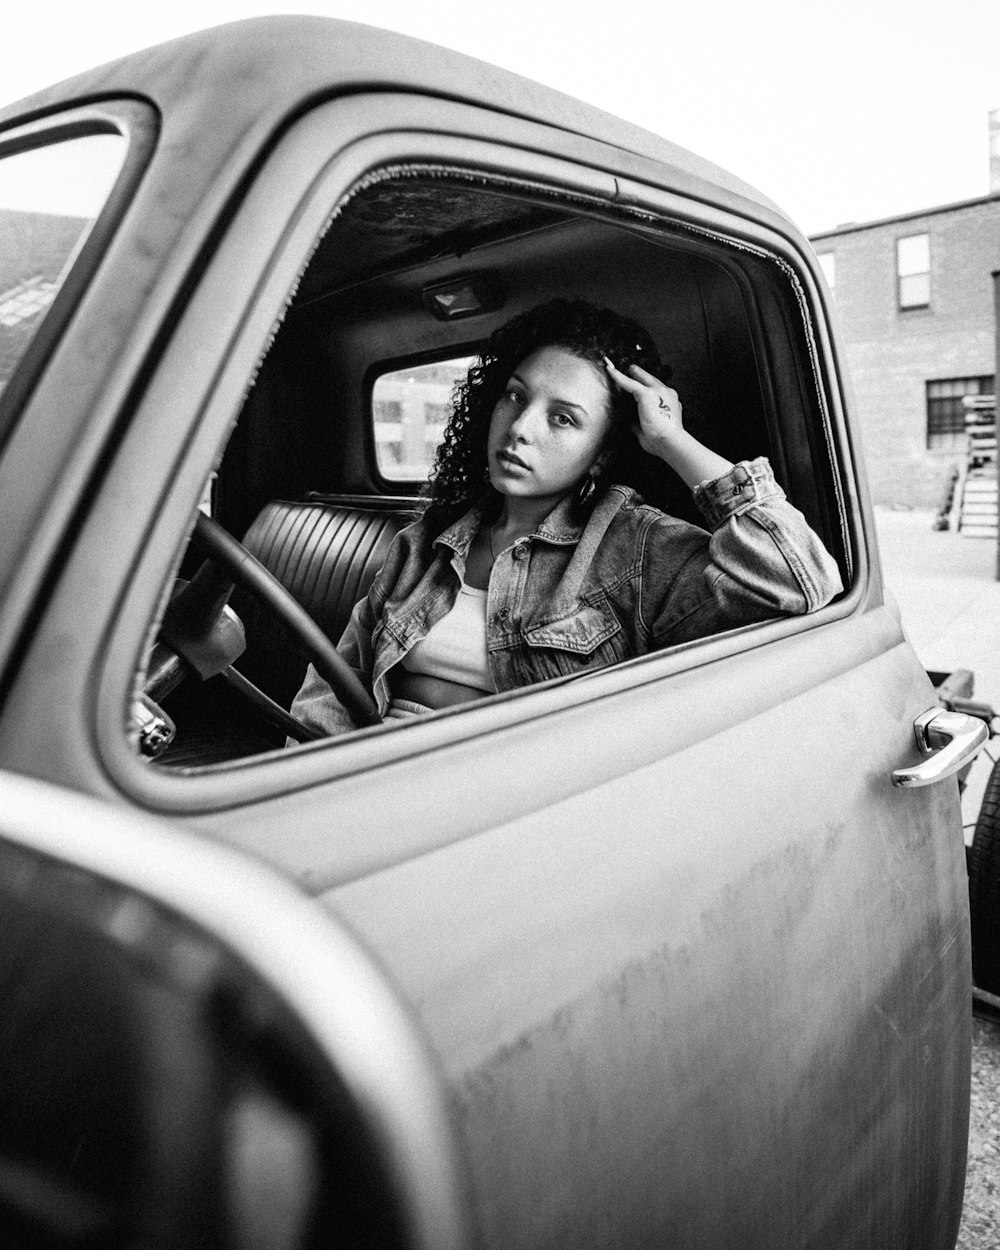 grayscale photo of woman in jacket sitting on car